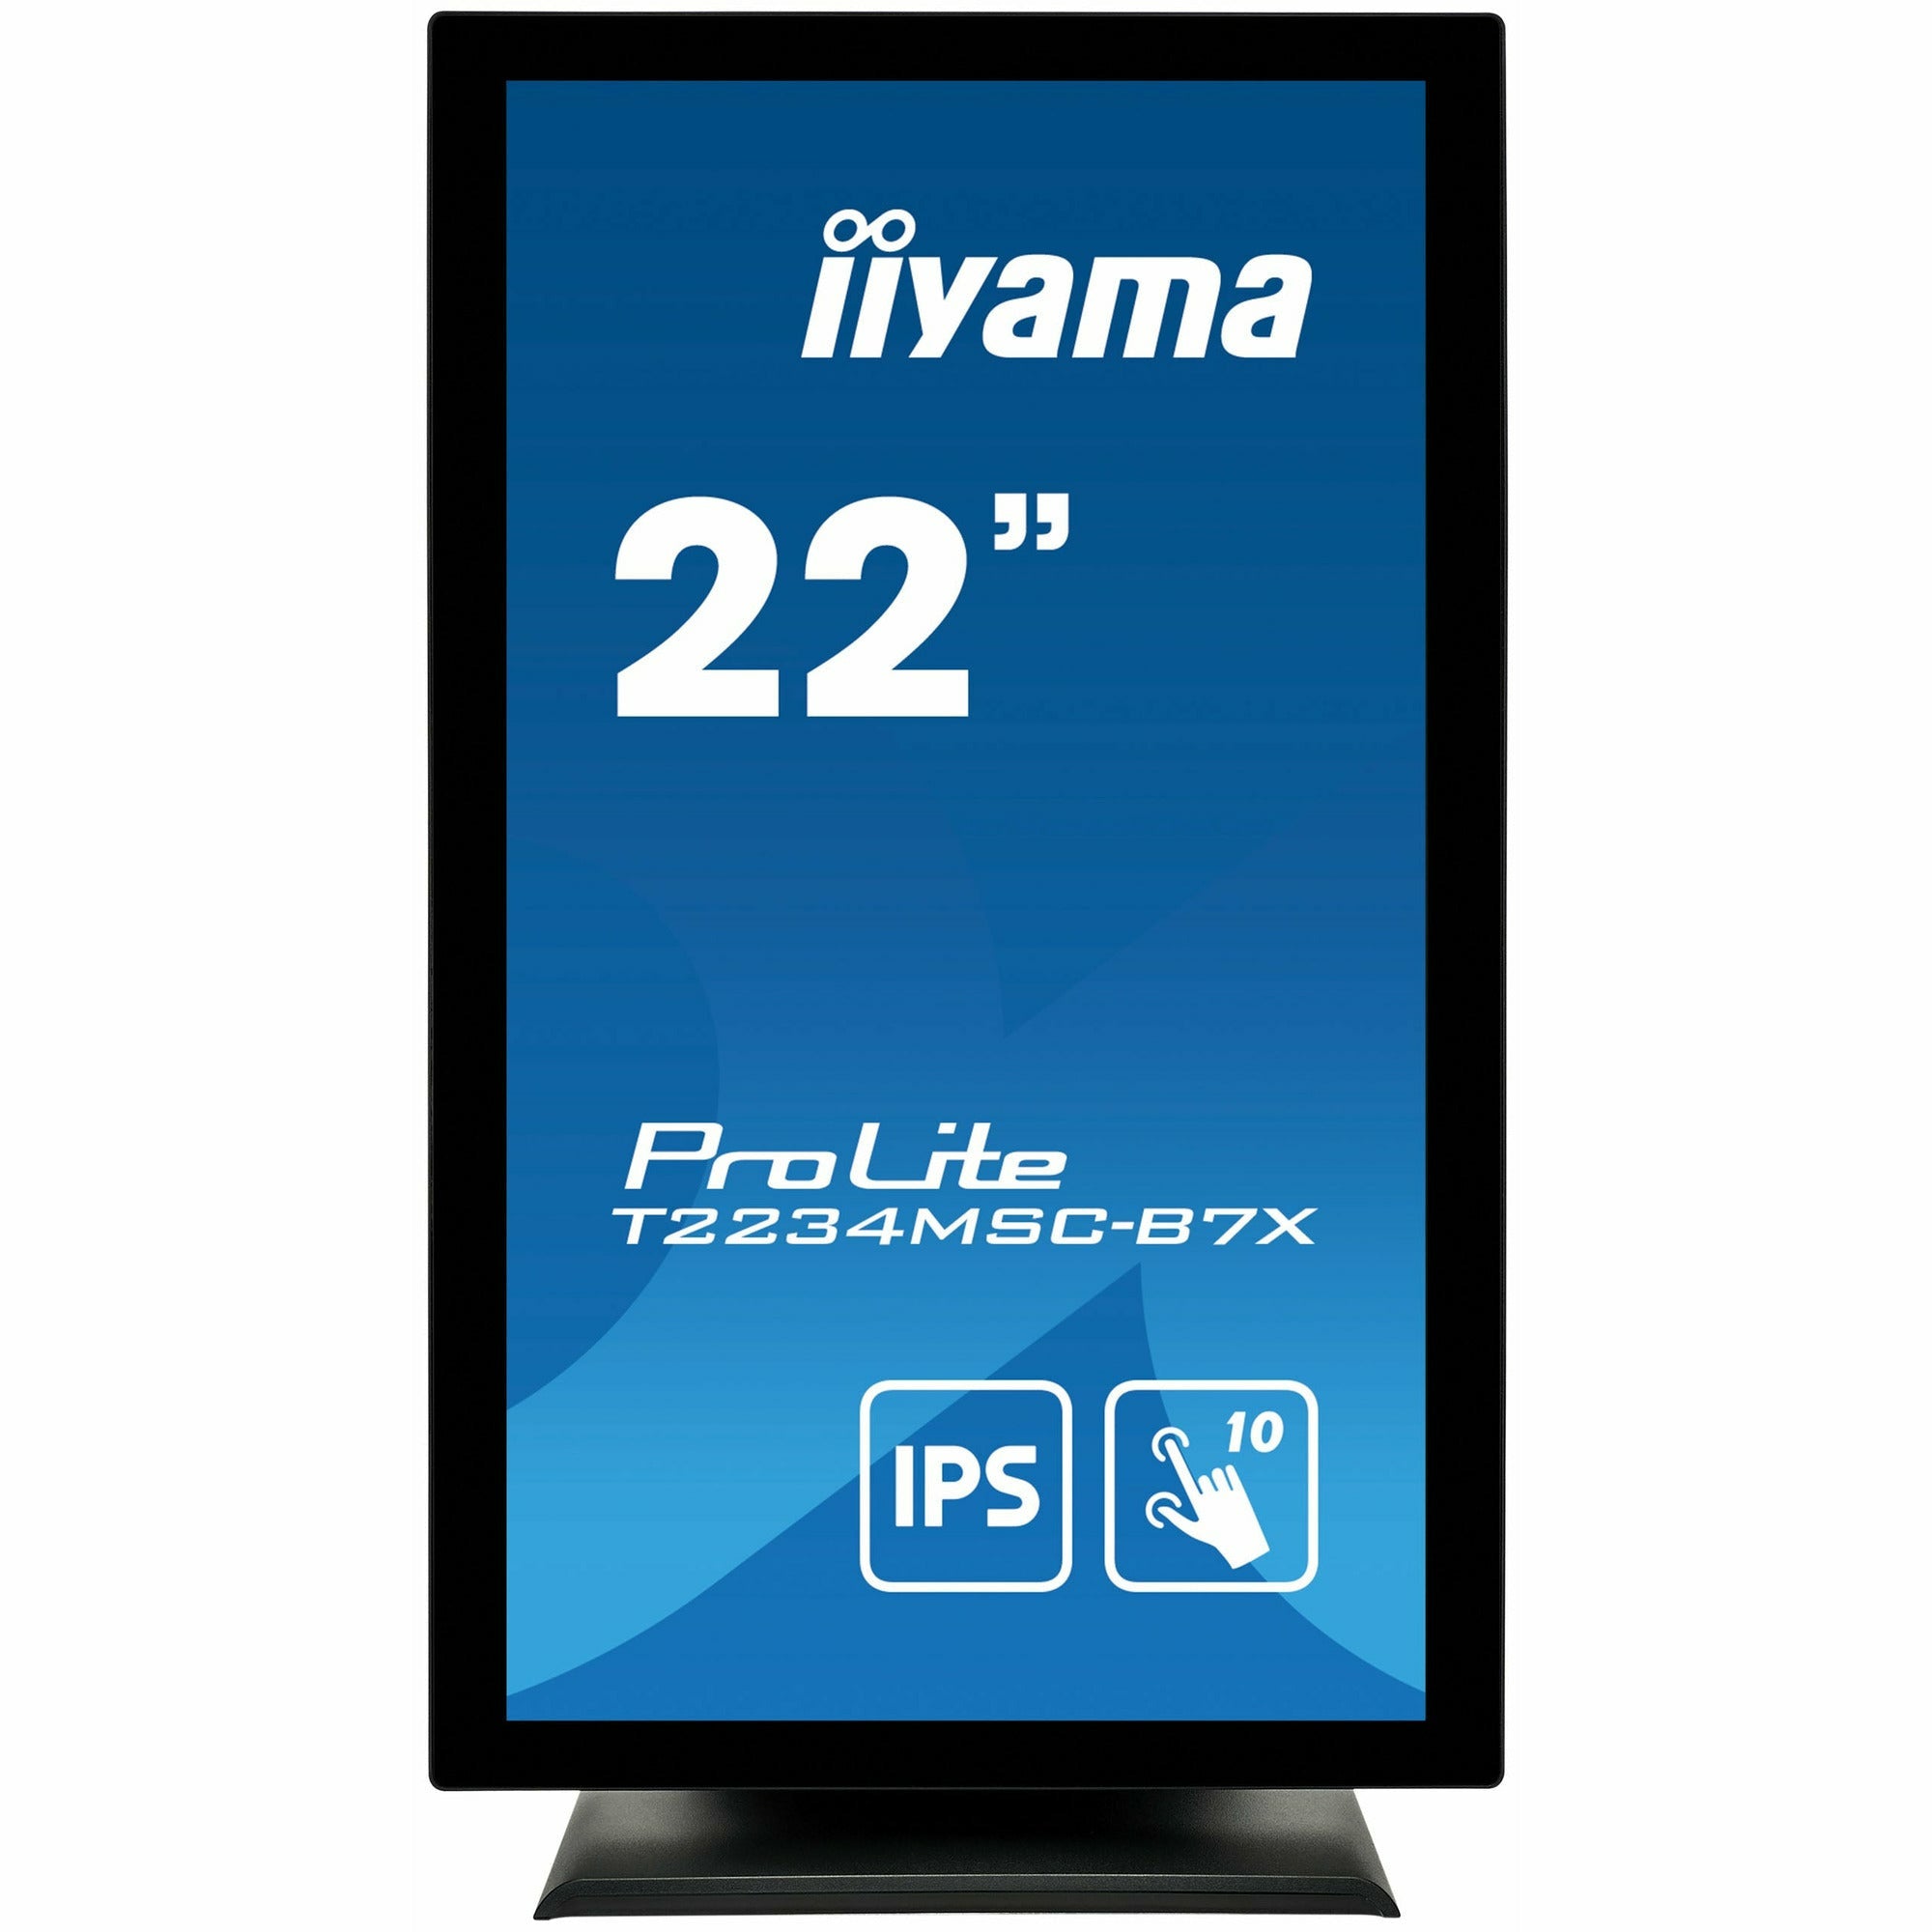 Share your vision with the iiyama 03 series professional displays